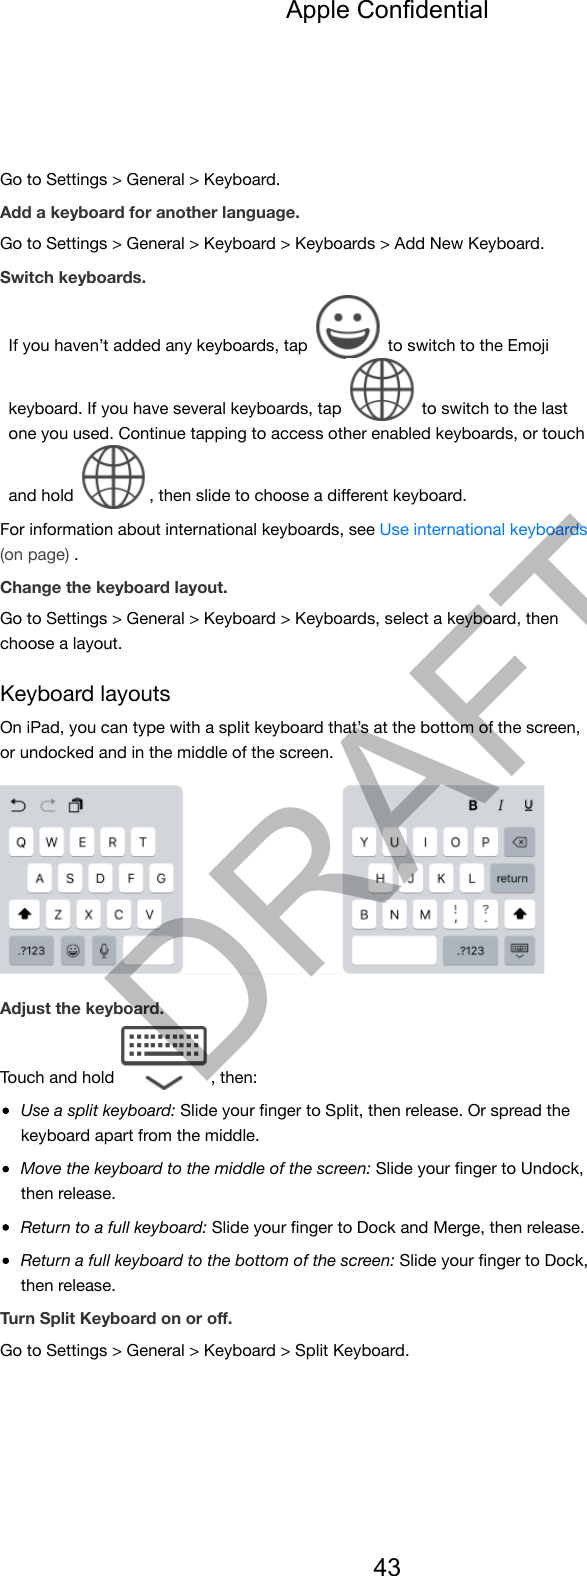 Go to Settings &gt; General &gt; Keyboard.Add a keyboard for another language.Go to Settings &gt; General &gt; Keyboard &gt; Keyboards &gt; Add New Keyboard.Switch keyboards.If you haven’t added any keyboards, tap   to switch to the Emojikeyboard. If you have several keyboards, tap   to switch to the lastone you used. Continue tapping to access other enabled keyboards, or touchand hold  , then slide to choose a diﬀerent keyboard.For information about international keyboards, see Use international keyboards(on page) .Change the keyboard layout.Go to Settings &gt; General &gt; Keyboard &gt; Keyboards, select a keyboard, thenchoose a layout.Keyboard layoutsOn iPad, you can type with a split keyboard that’s at the bottom of the screen,or undocked and in the middle of the screen.Adjust the keyboard.Touch and hold  , then:Use a split keyboard: Slide your ﬁnger to Split, then release. Or spread thekeyboard apart from the middle.Move the keyboard to the middle of the screen: Slide your ﬁnger to Undock,then release.Return to a full keyboard: Slide your ﬁnger to Dock and Merge, then release.Return a full keyboard to the bottom of the screen: Slide your ﬁnger to Dock,then release.Turn Split Keyboard on or oﬀ.Go to Settings &gt; General &gt; Keyboard &gt; Split Keyboard.Apple Confidential43DRAFT